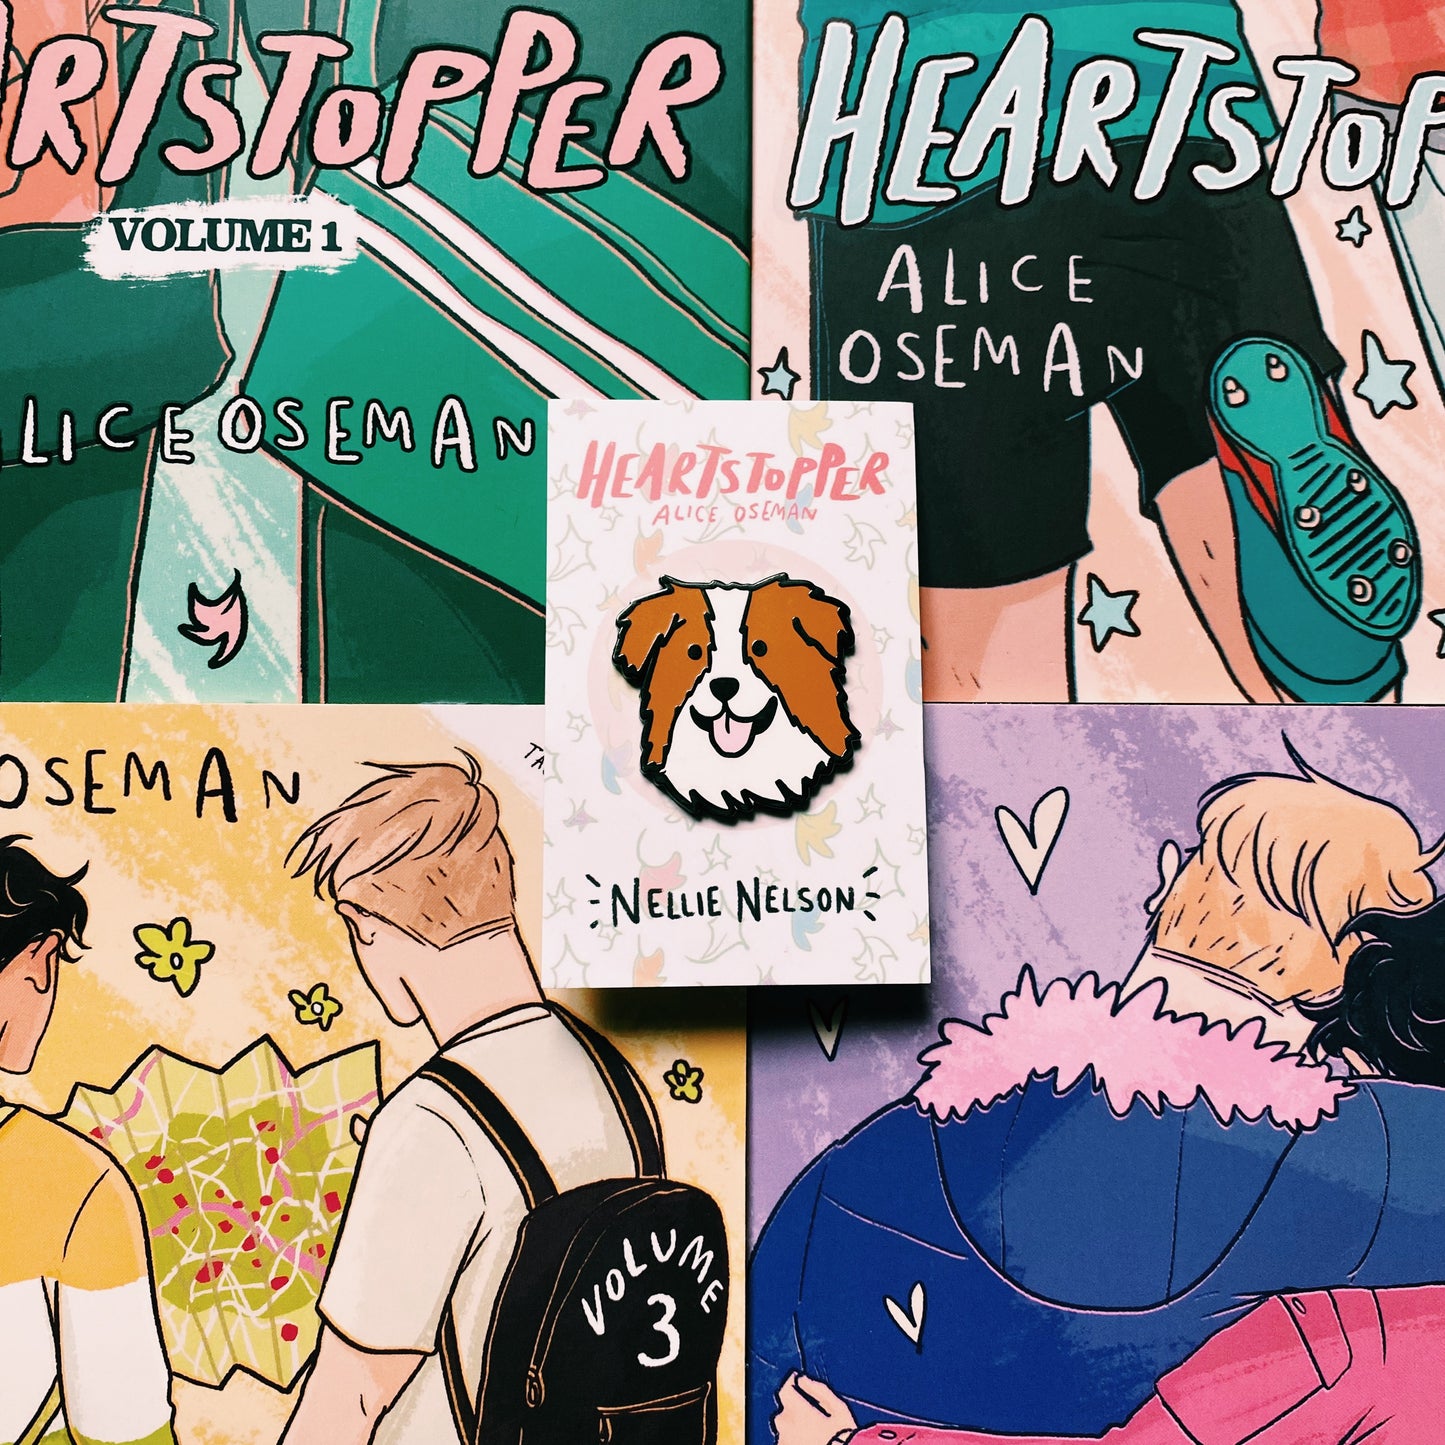 Nellie Nelson enamel pin inspired by Alice Oseman's Heartstopper series. The pin is being held in front of the Hearstopper graphic novels.